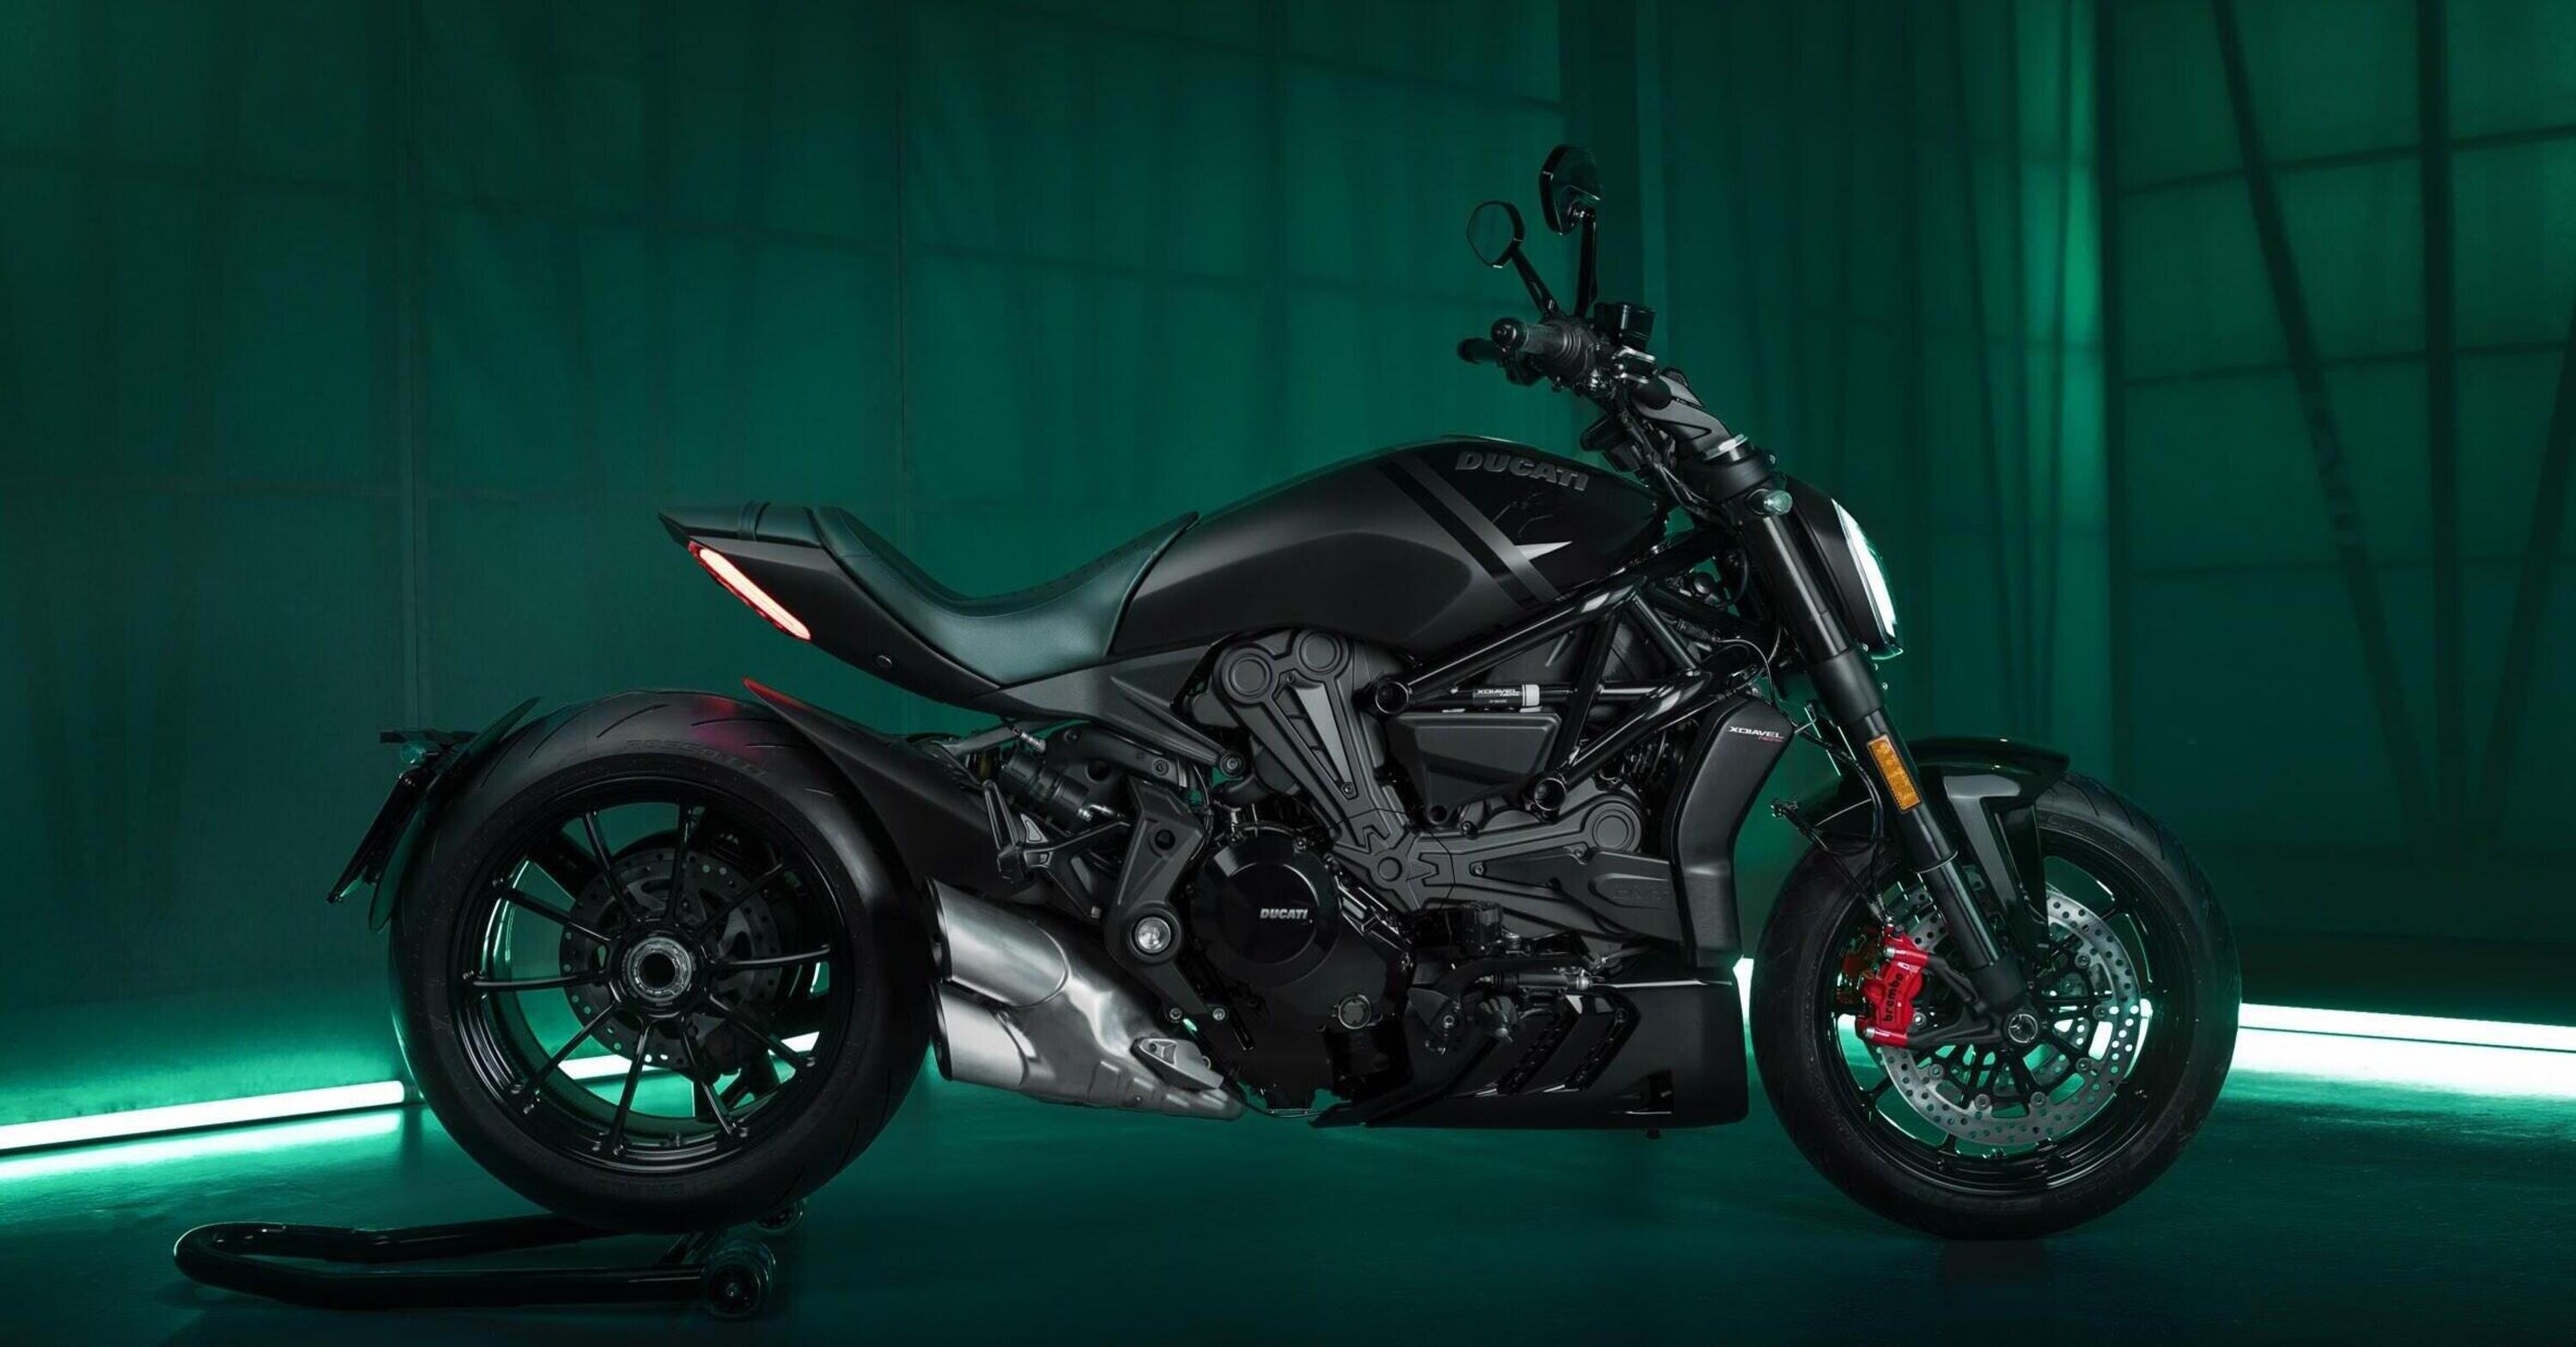 Ducati Diavel V4, The Unexpected?